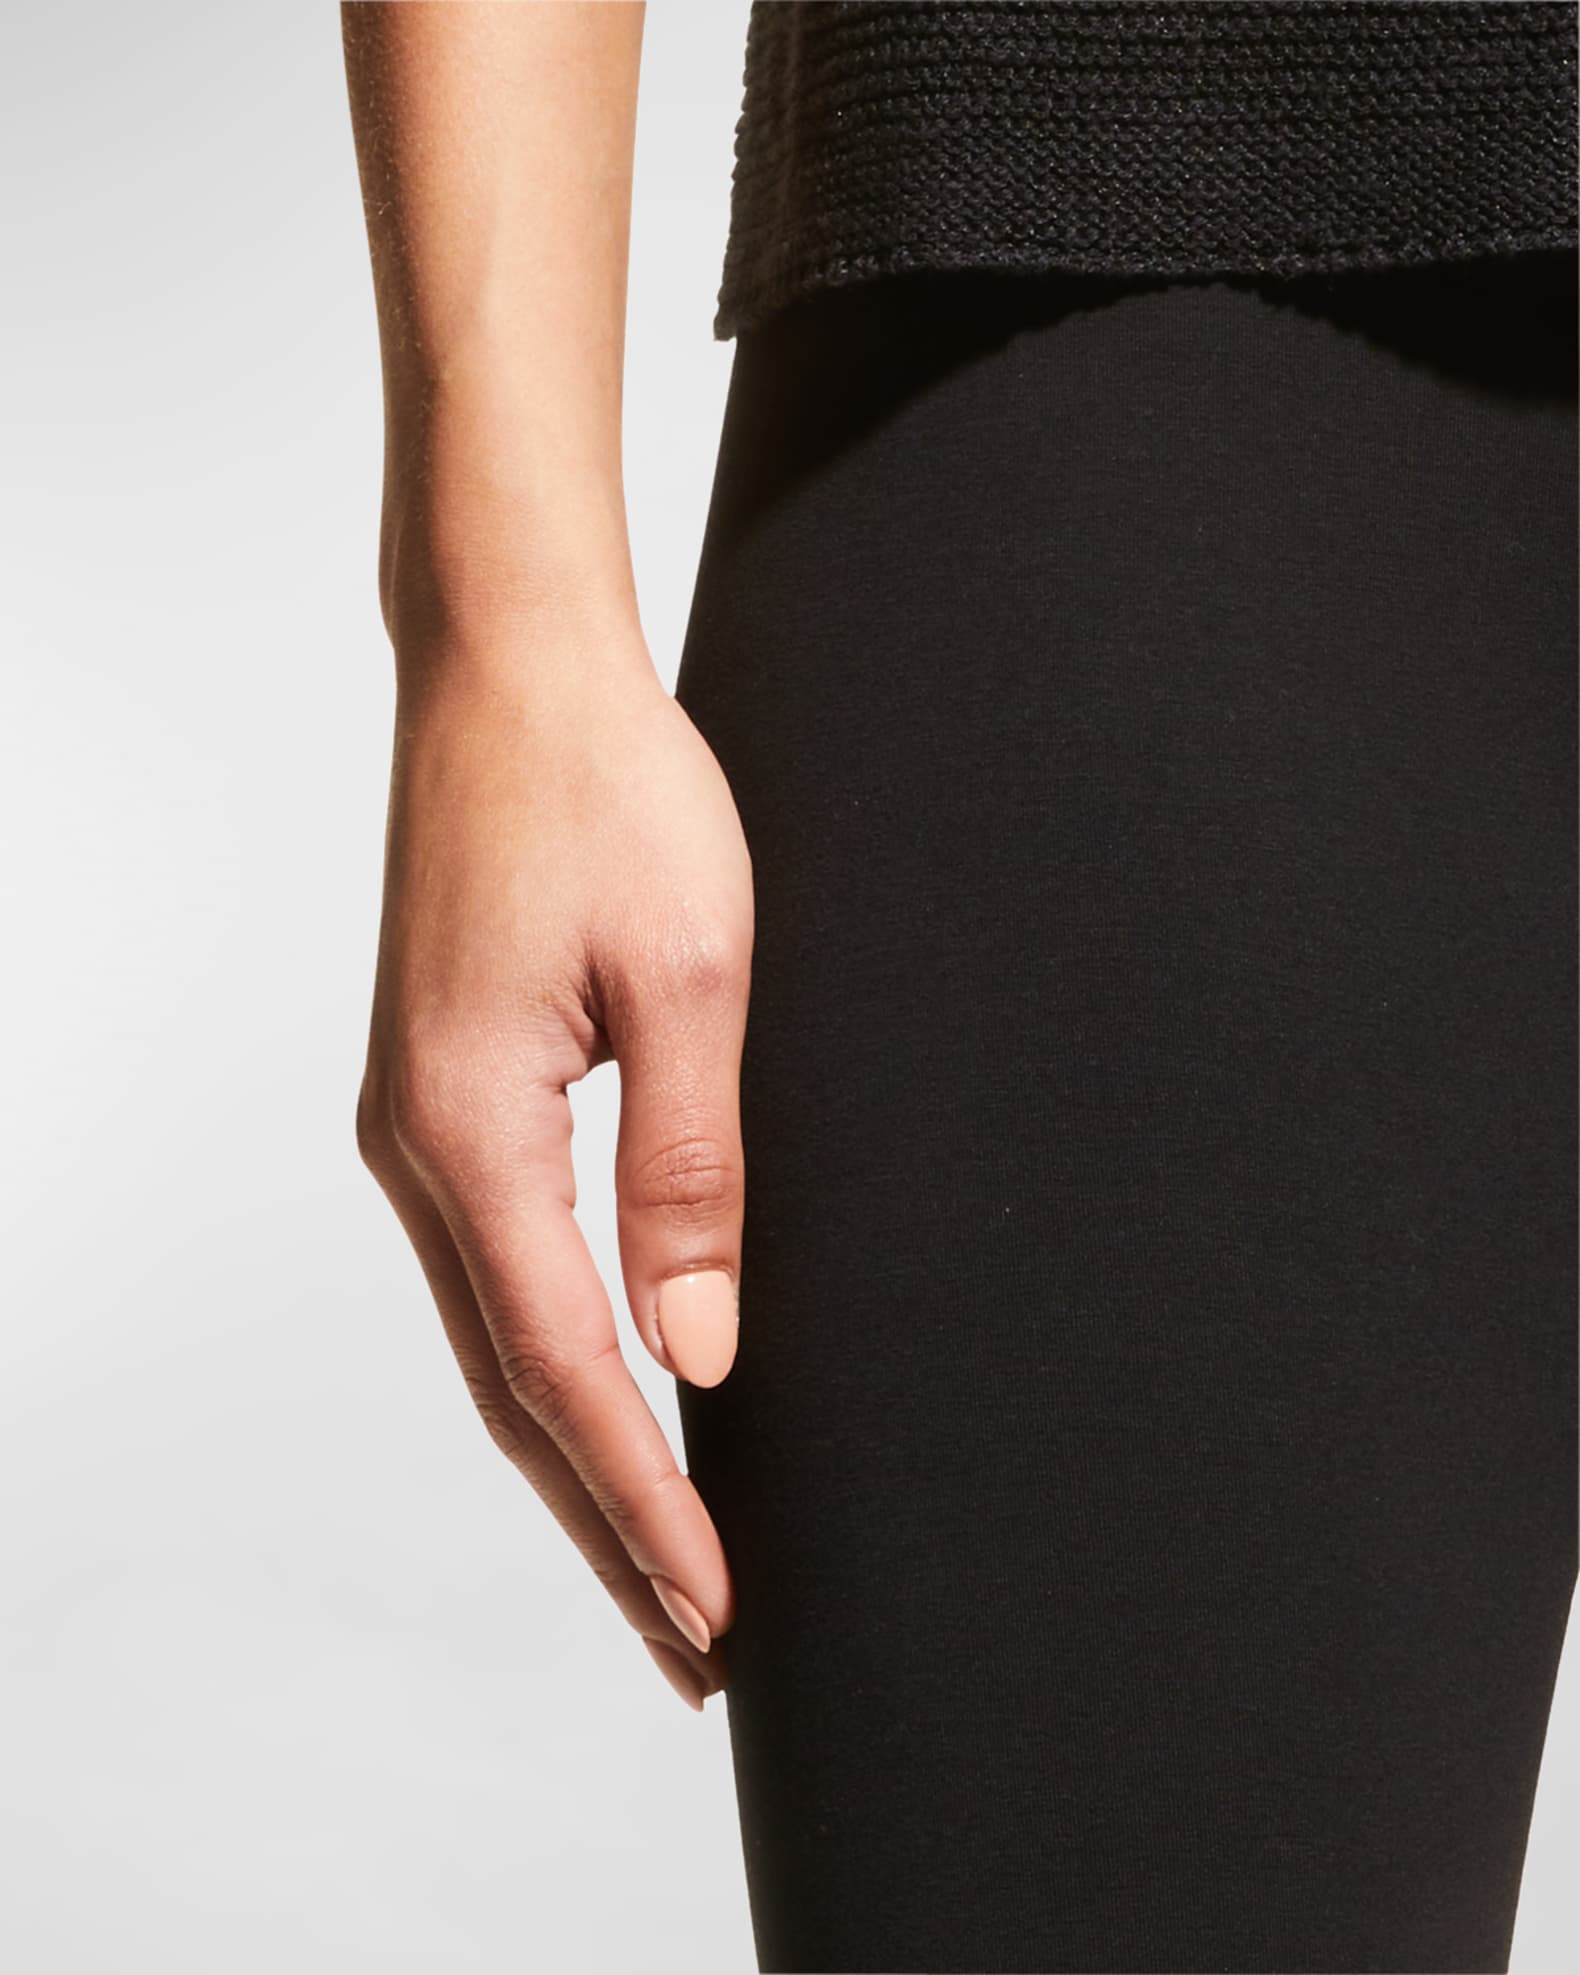 Jersey leggings with branded elastic in Black for